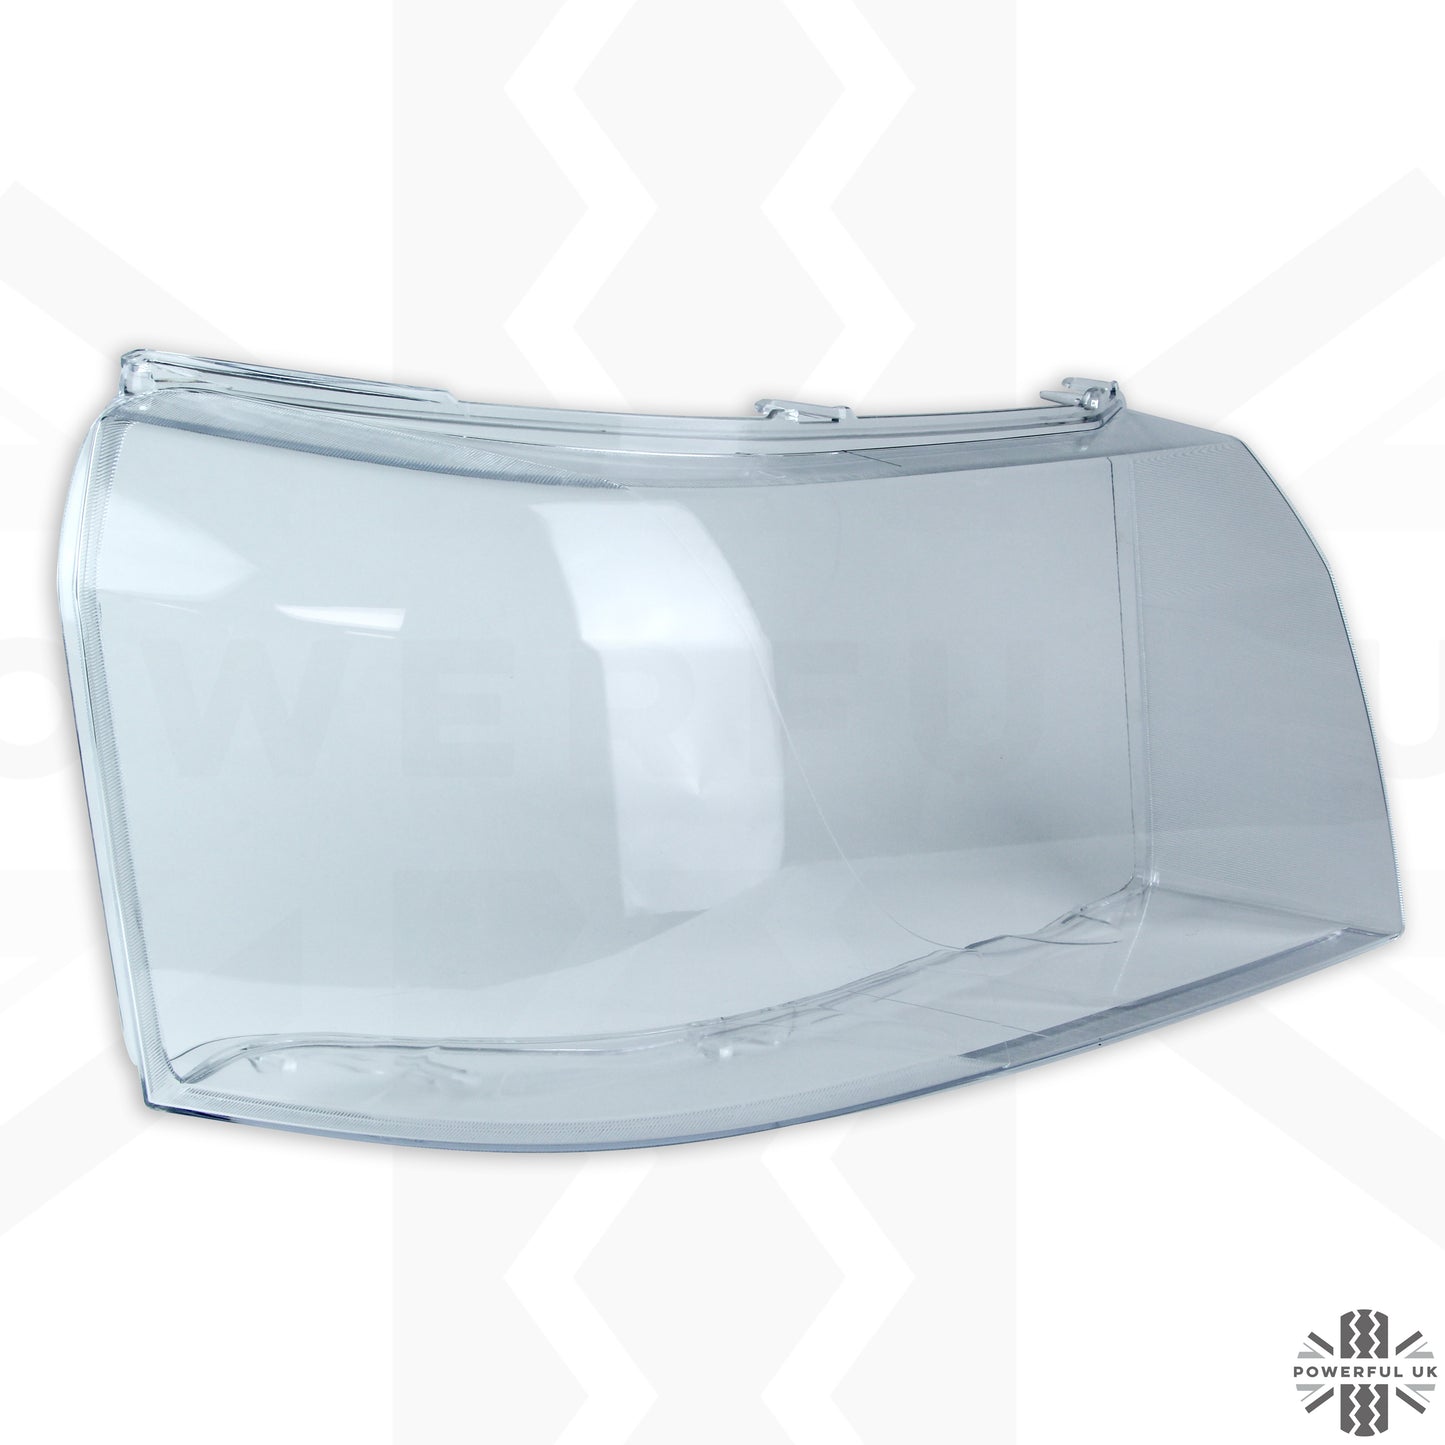 Replacement Headlight Lens - Late Type -  for Land Rover Freelander 2 - RH